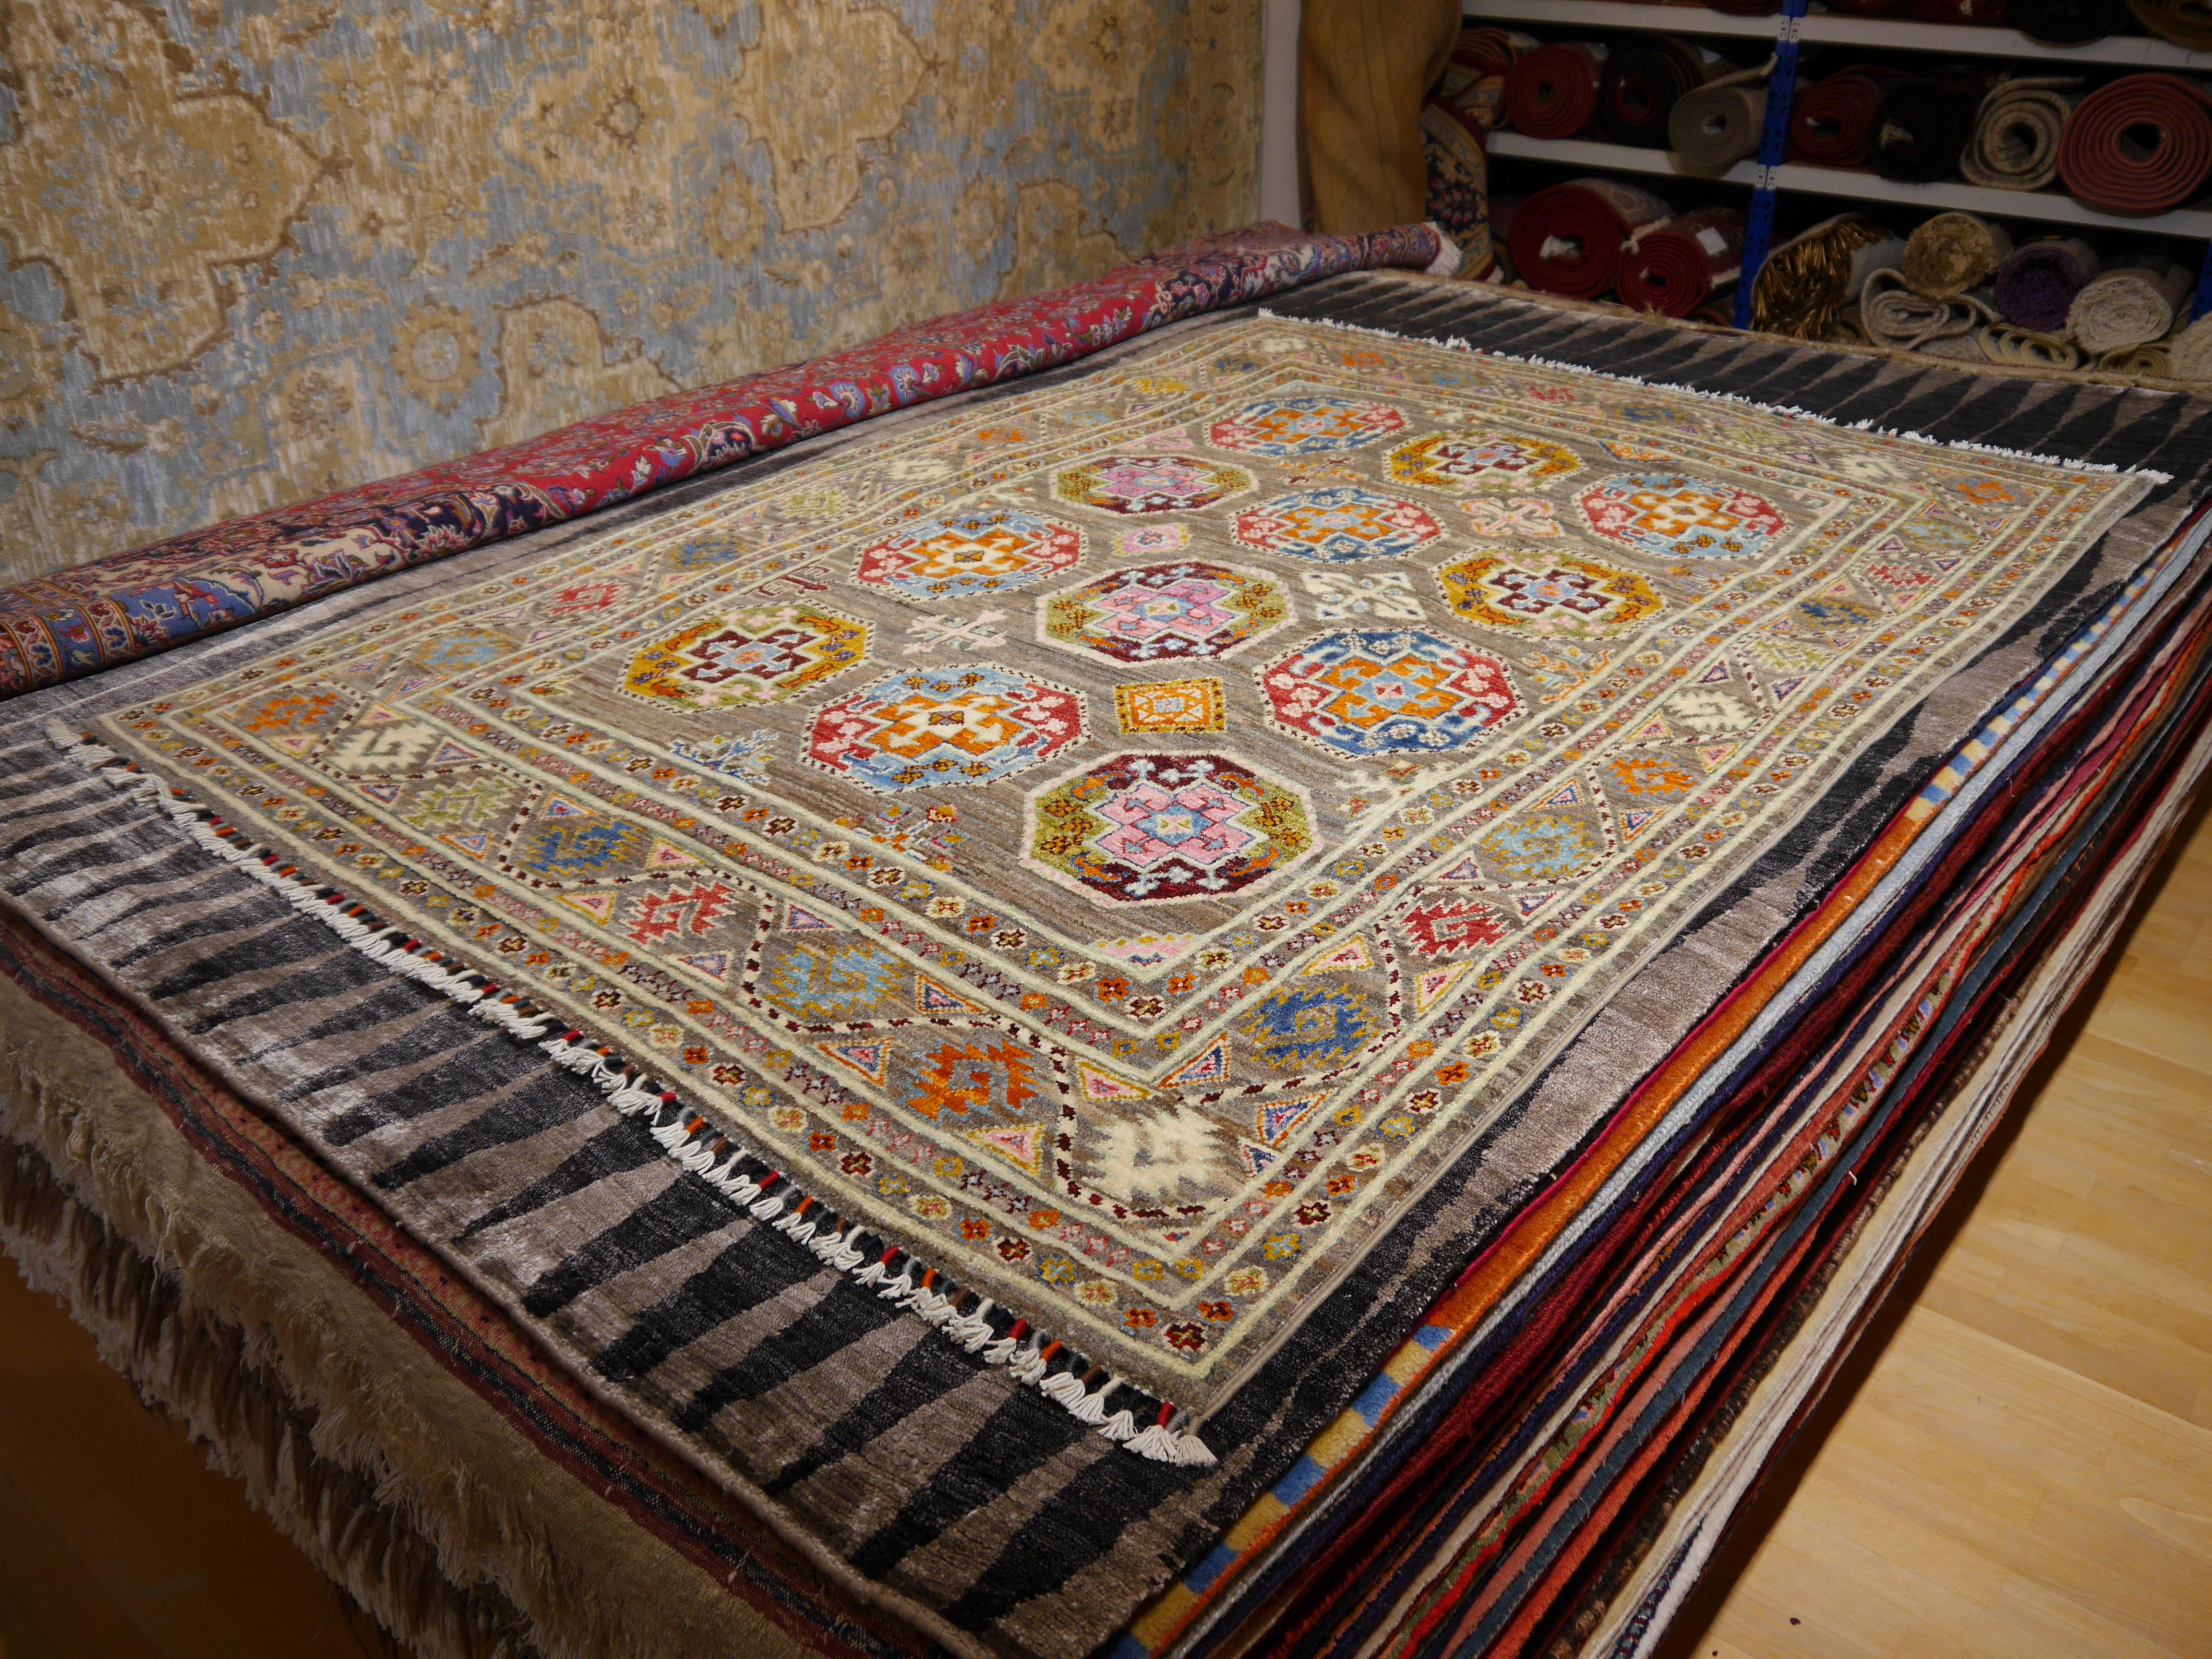 Ersari Rug Arijana Afghan 6.6 x 4.6 ft hand-knotted wool
Ersari rugs are made by Turkmen tribes in northern Afghanistan and Uzbekistan.
Arijana or Ariana carpets are of high quality, have color pigments made from natural plants or minerals and are